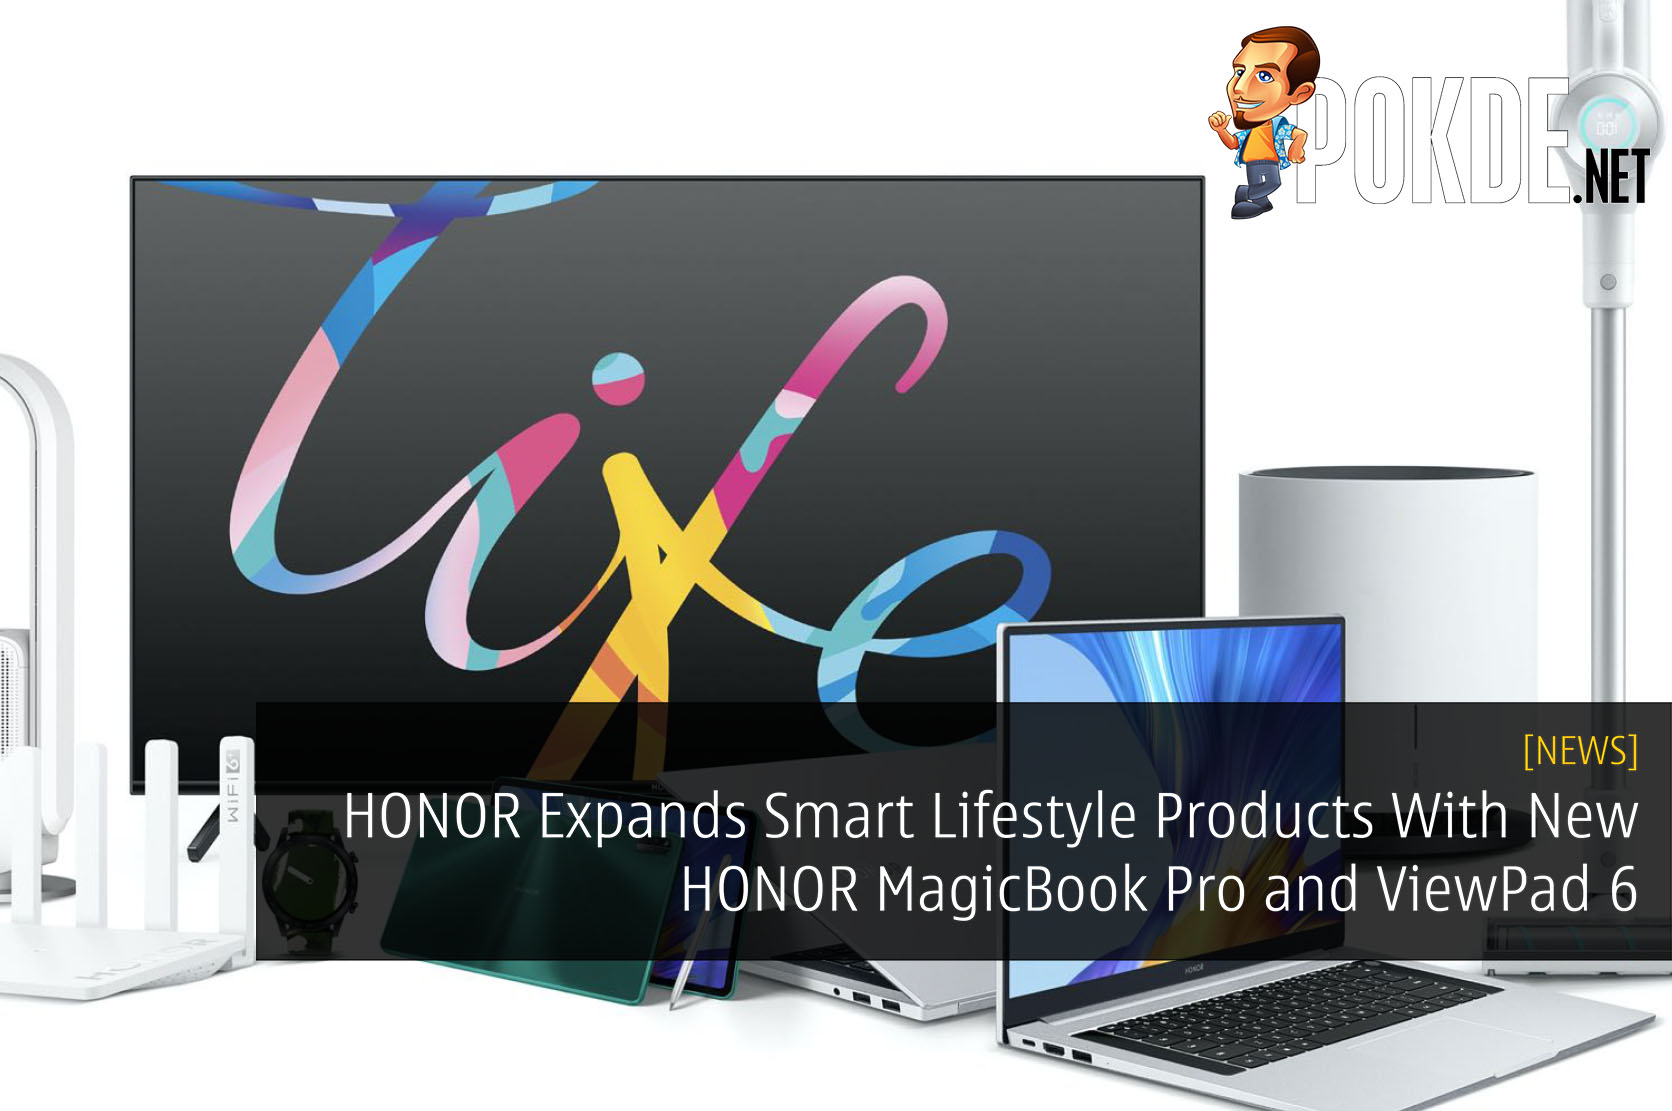 HONOR Expands Smart Lifestyle Products With New HONOR MagicBook Pro and HONOR ViewPad 6 10